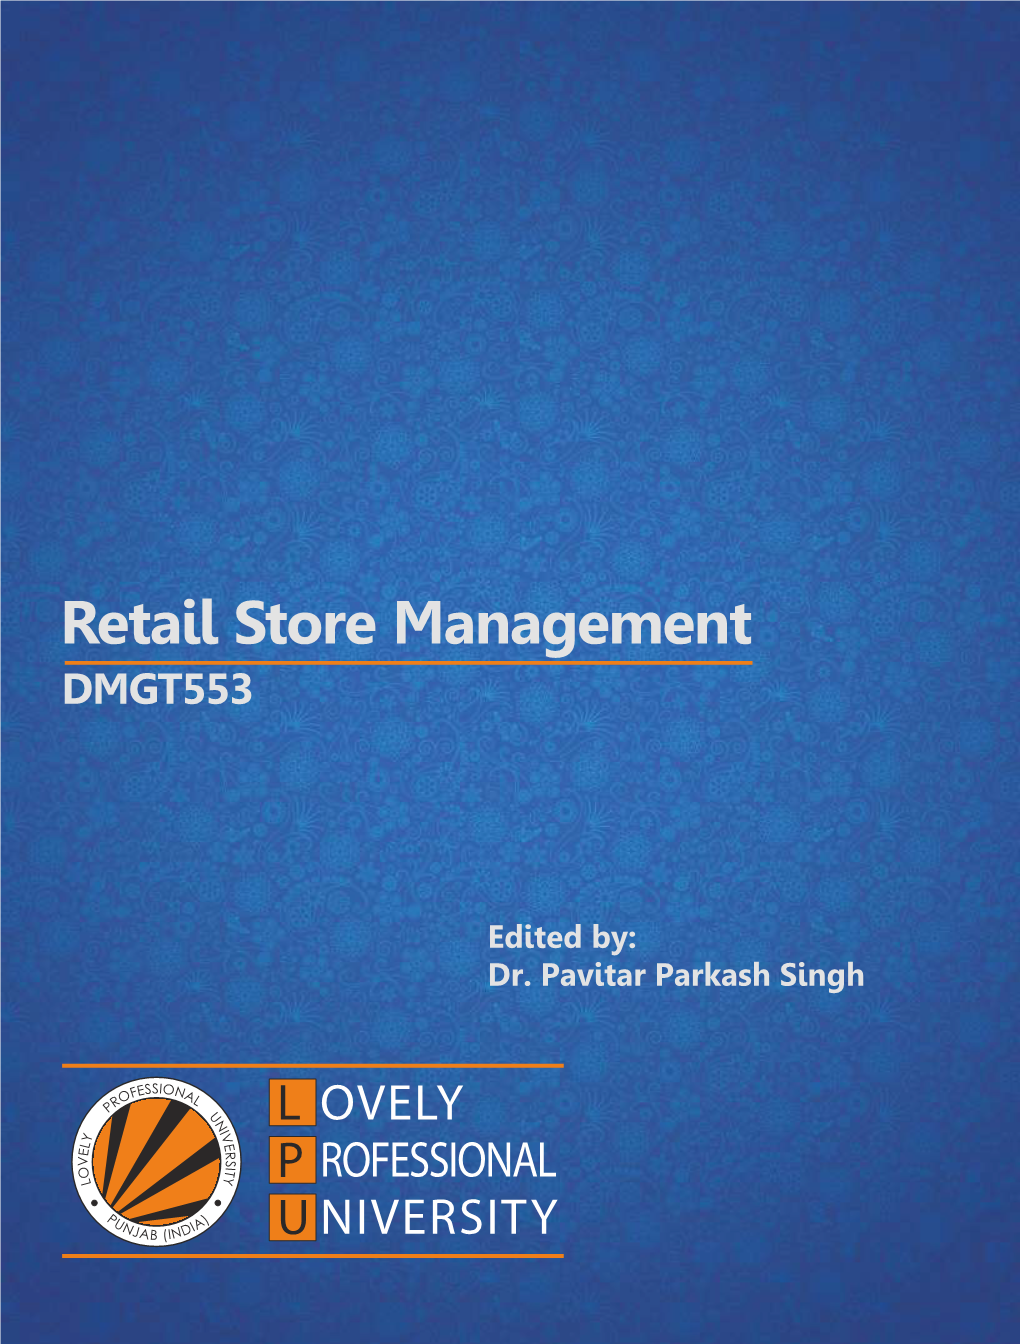 RETAIL STORE MANAGEMENT Edited by Dr